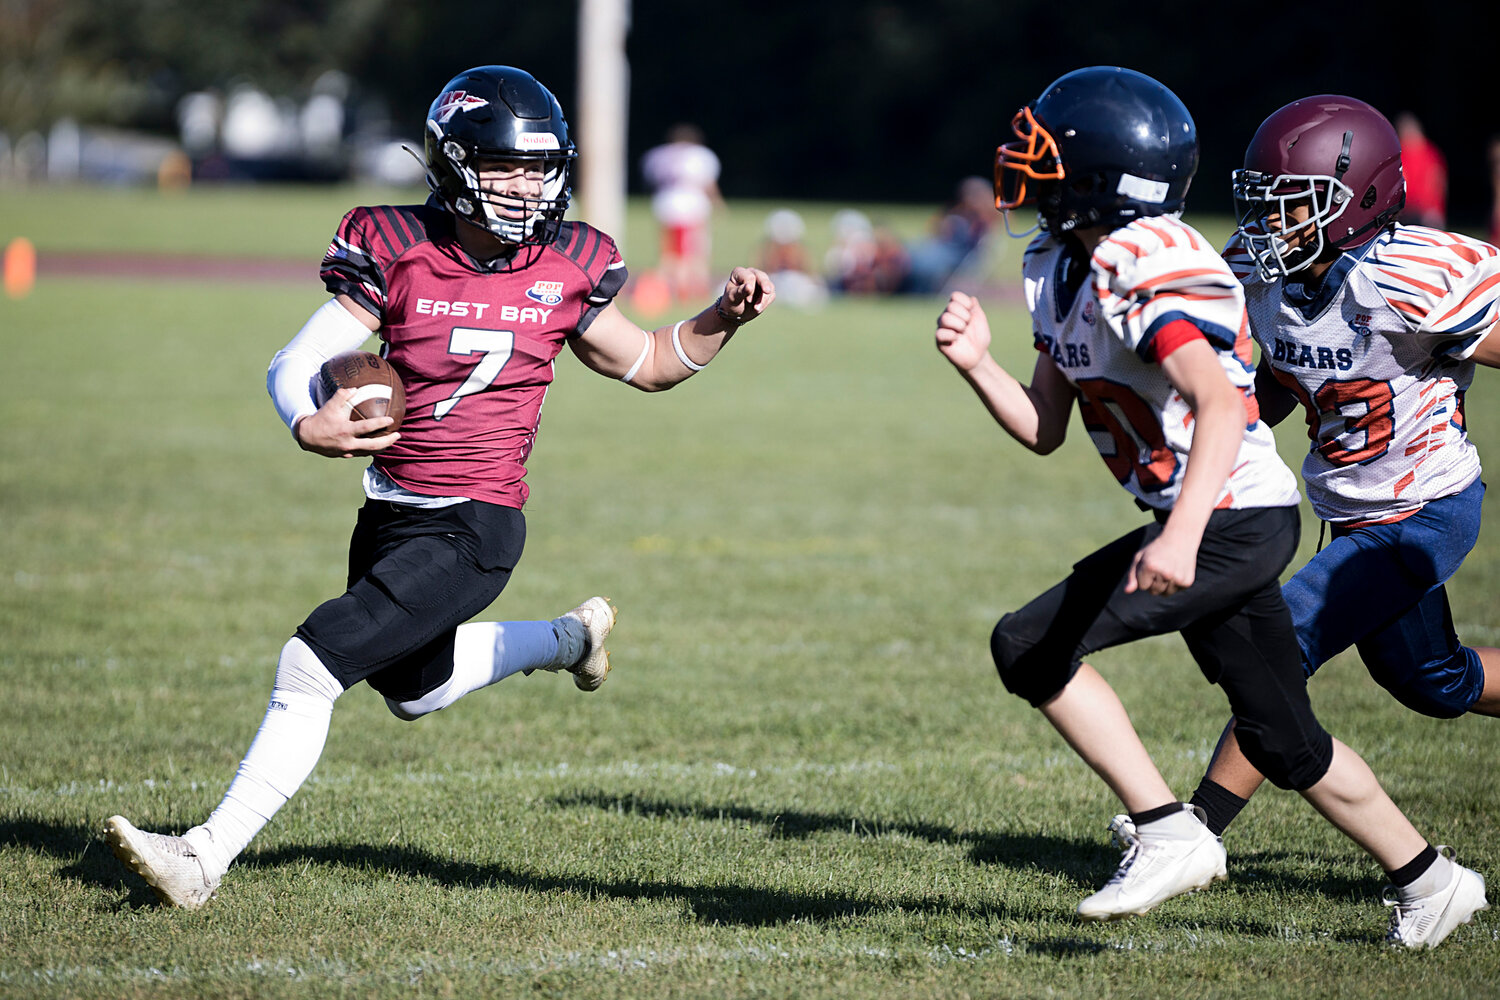 14U's Tyler Rhynard runs around the New Bedford defense while carrying the ball for East Bay. 